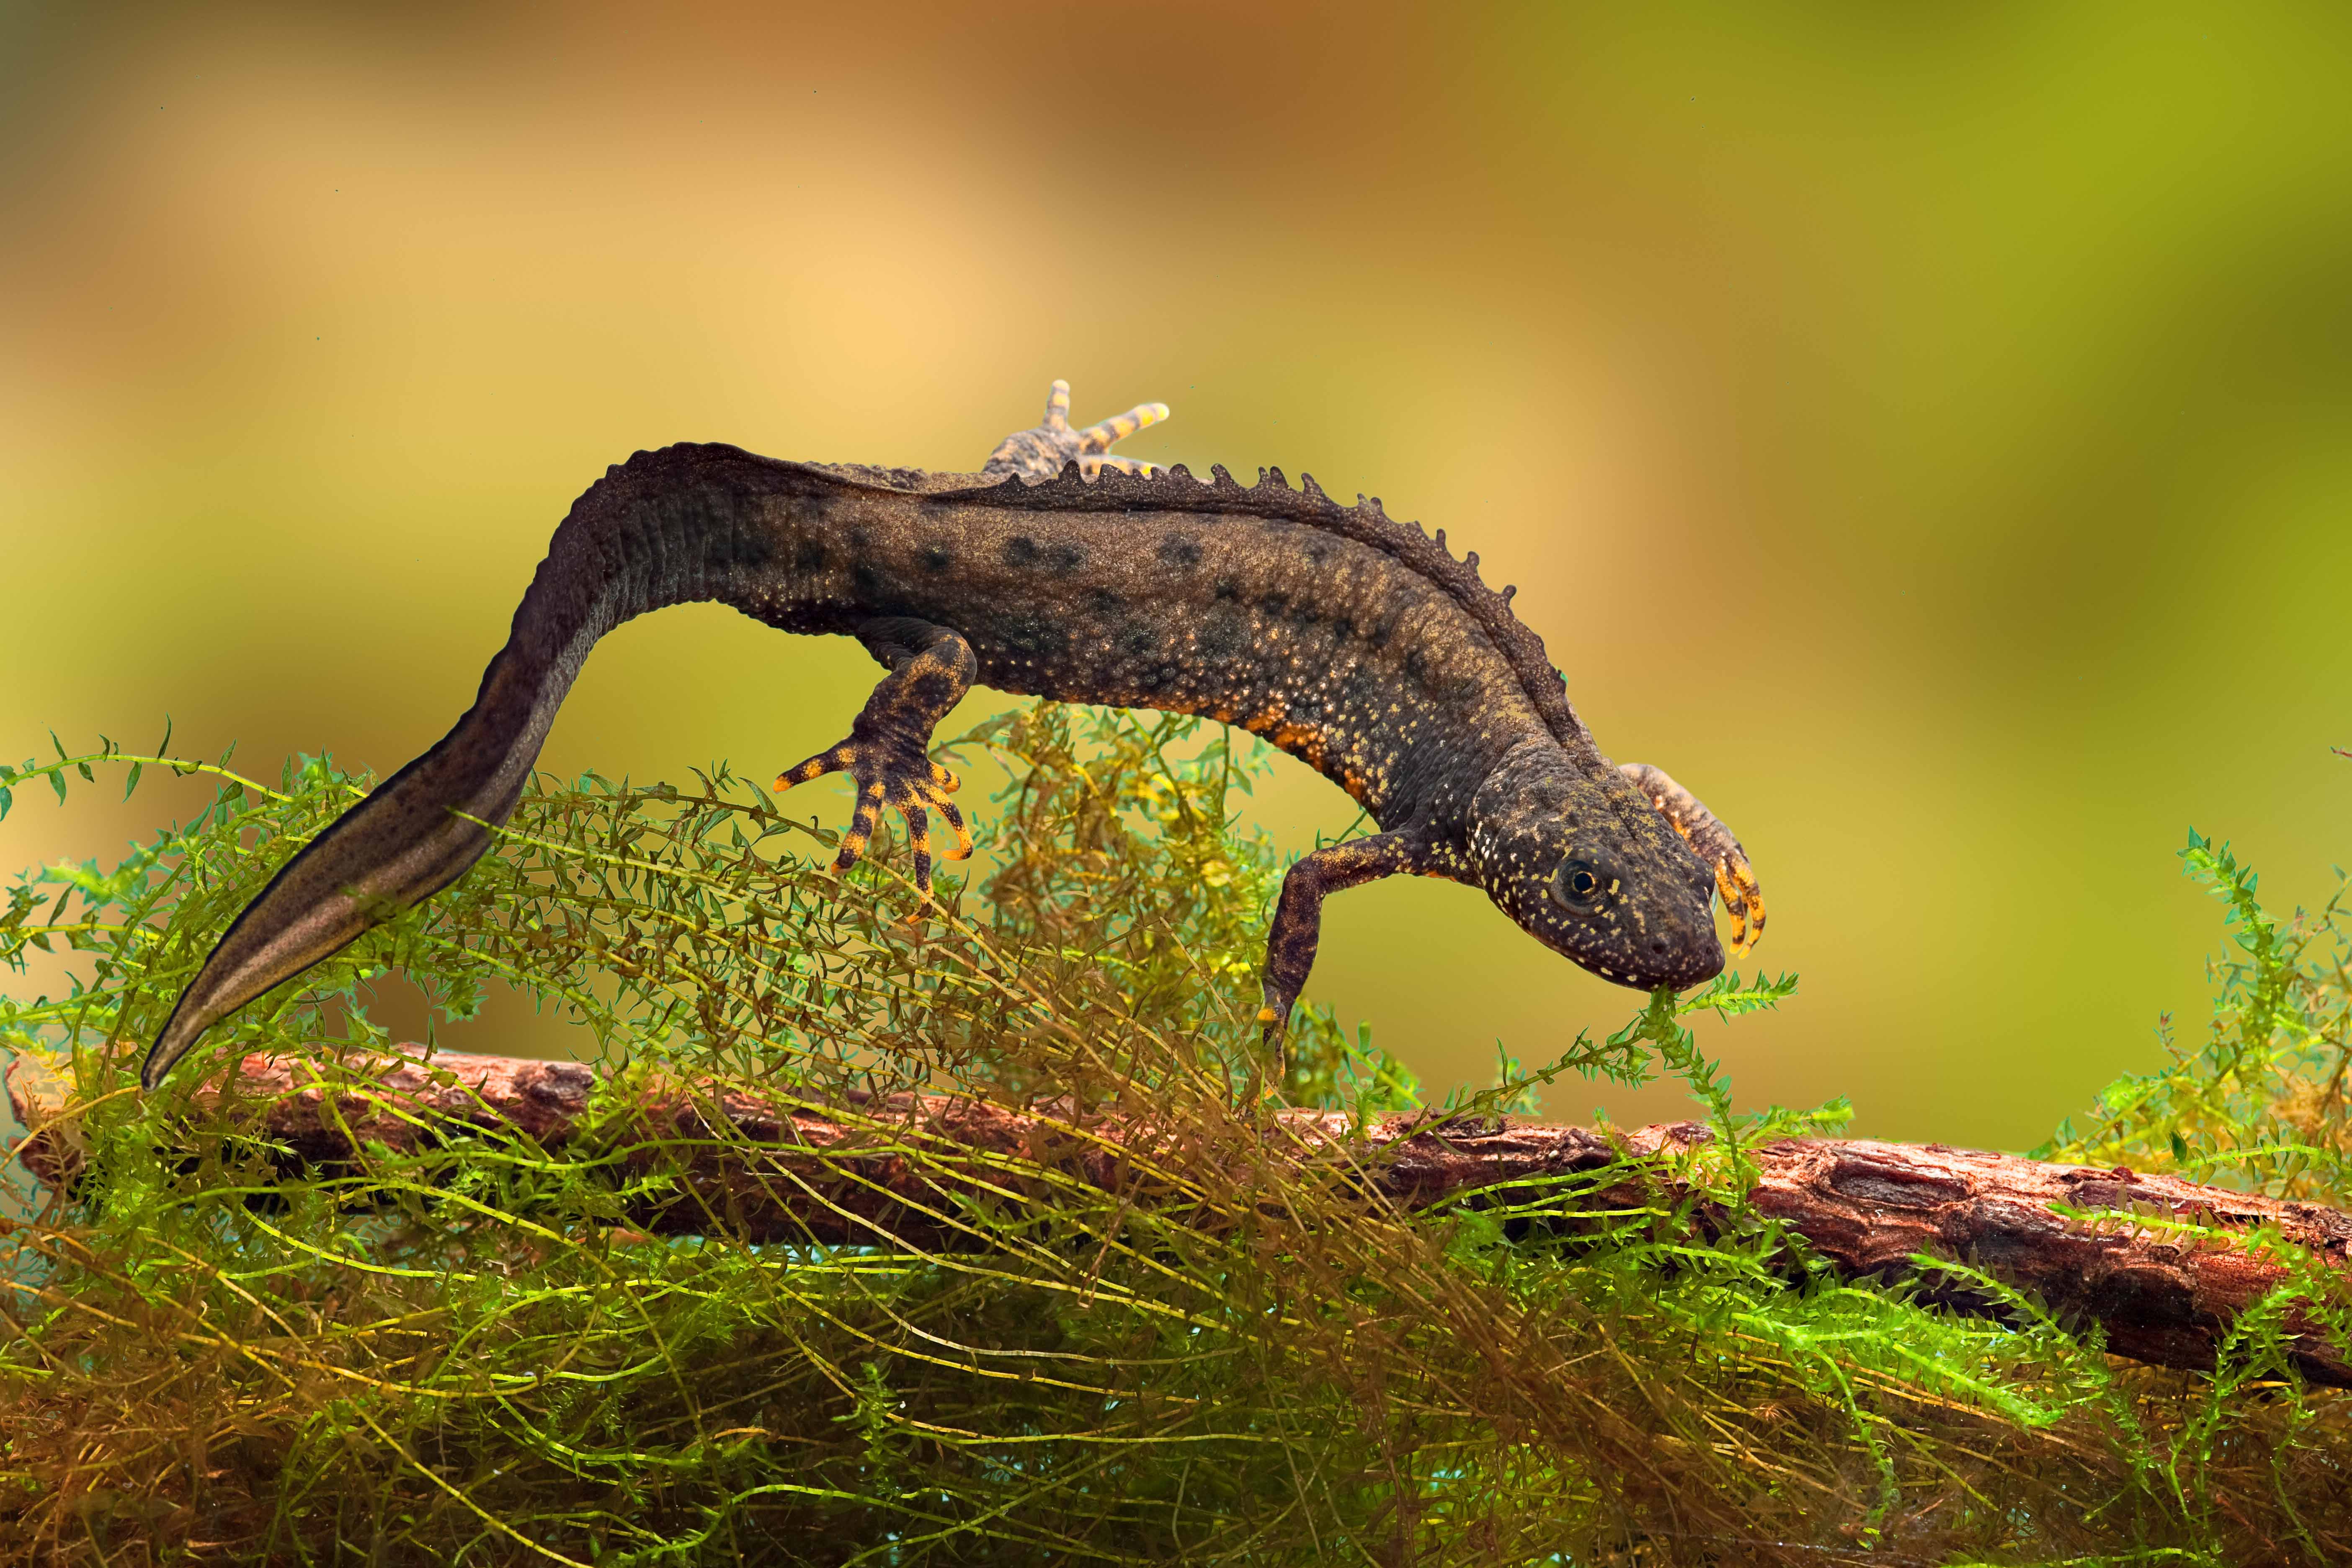 Bringing innovation into the great crested newt world